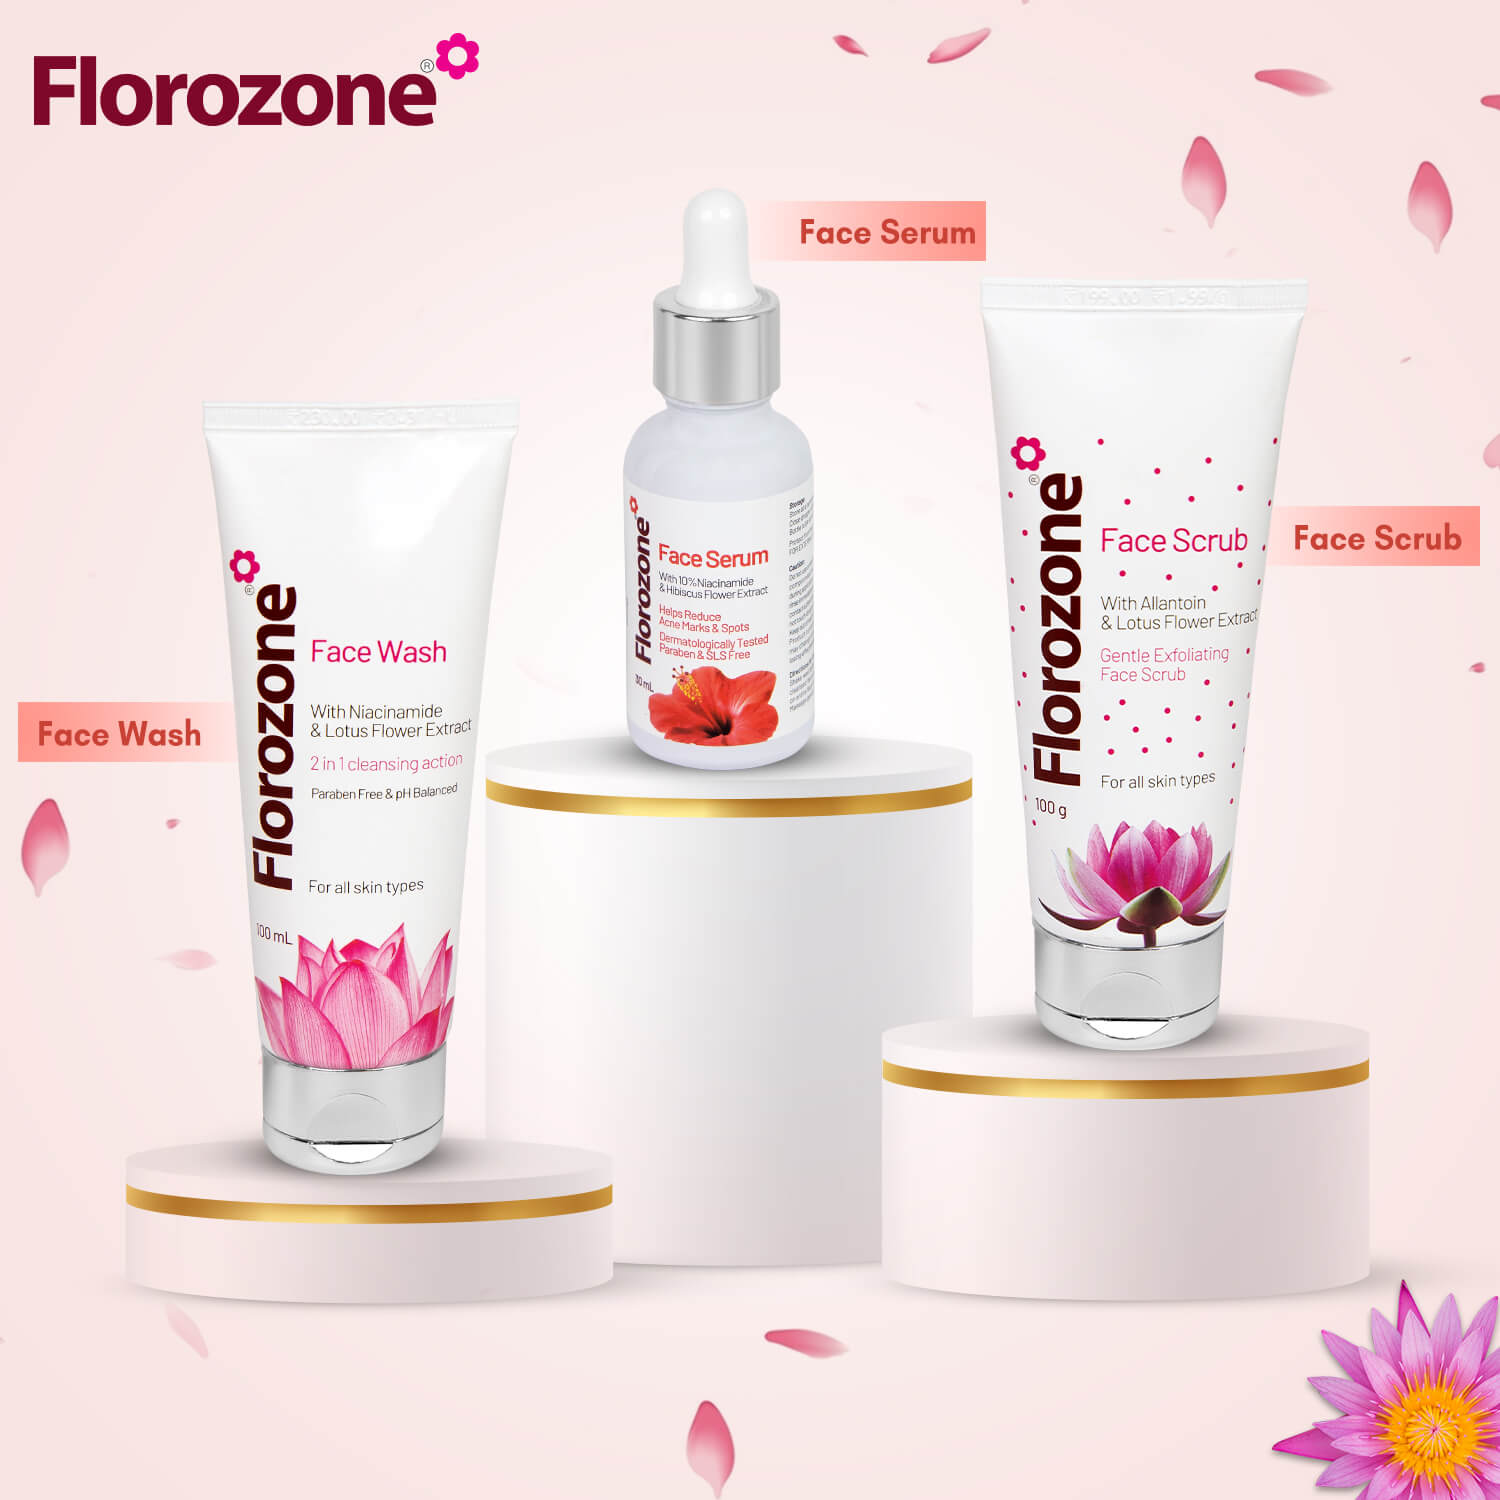 Florozone Face Serum with Hibiscus Flower extract & Niacinamide